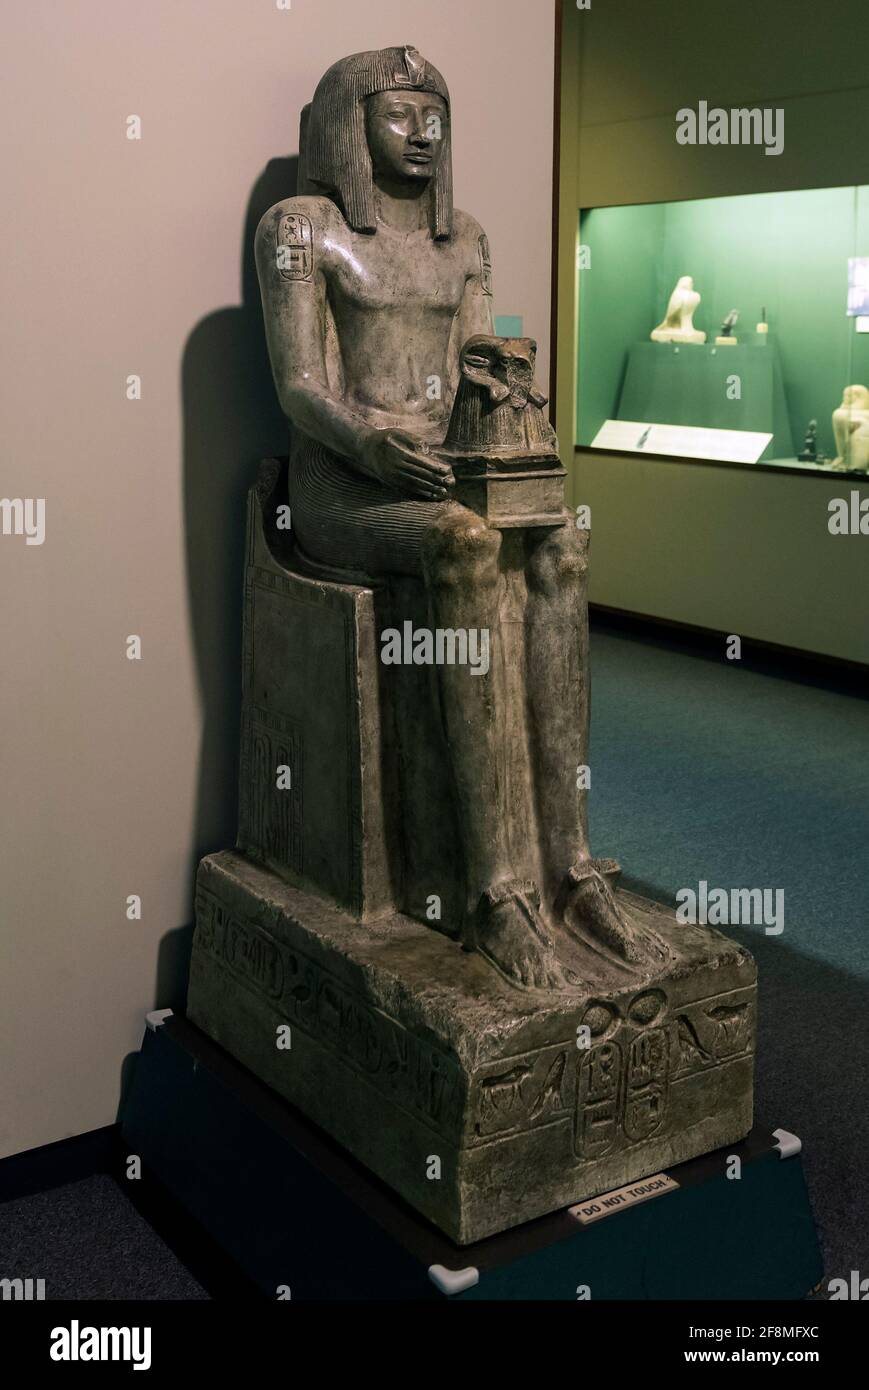 San Jose, California, USA. 14th Apr, 2021. A Statue of Seti II is seen on display at the Rosicrucian Egyptian Museum. Established in 1928 as The Rosicrucian Egyptian Oriental Museum, the Museum - owned by the Rosicrucian Order, a philosophical and educational 501c3 public benefit organization - now houses more than 4,000 artifacts. It is the largest display of Egyptian artifacts in western North America. Credit: Brian Cahn/ZUMA Wire/Alamy Live News Stock Photo